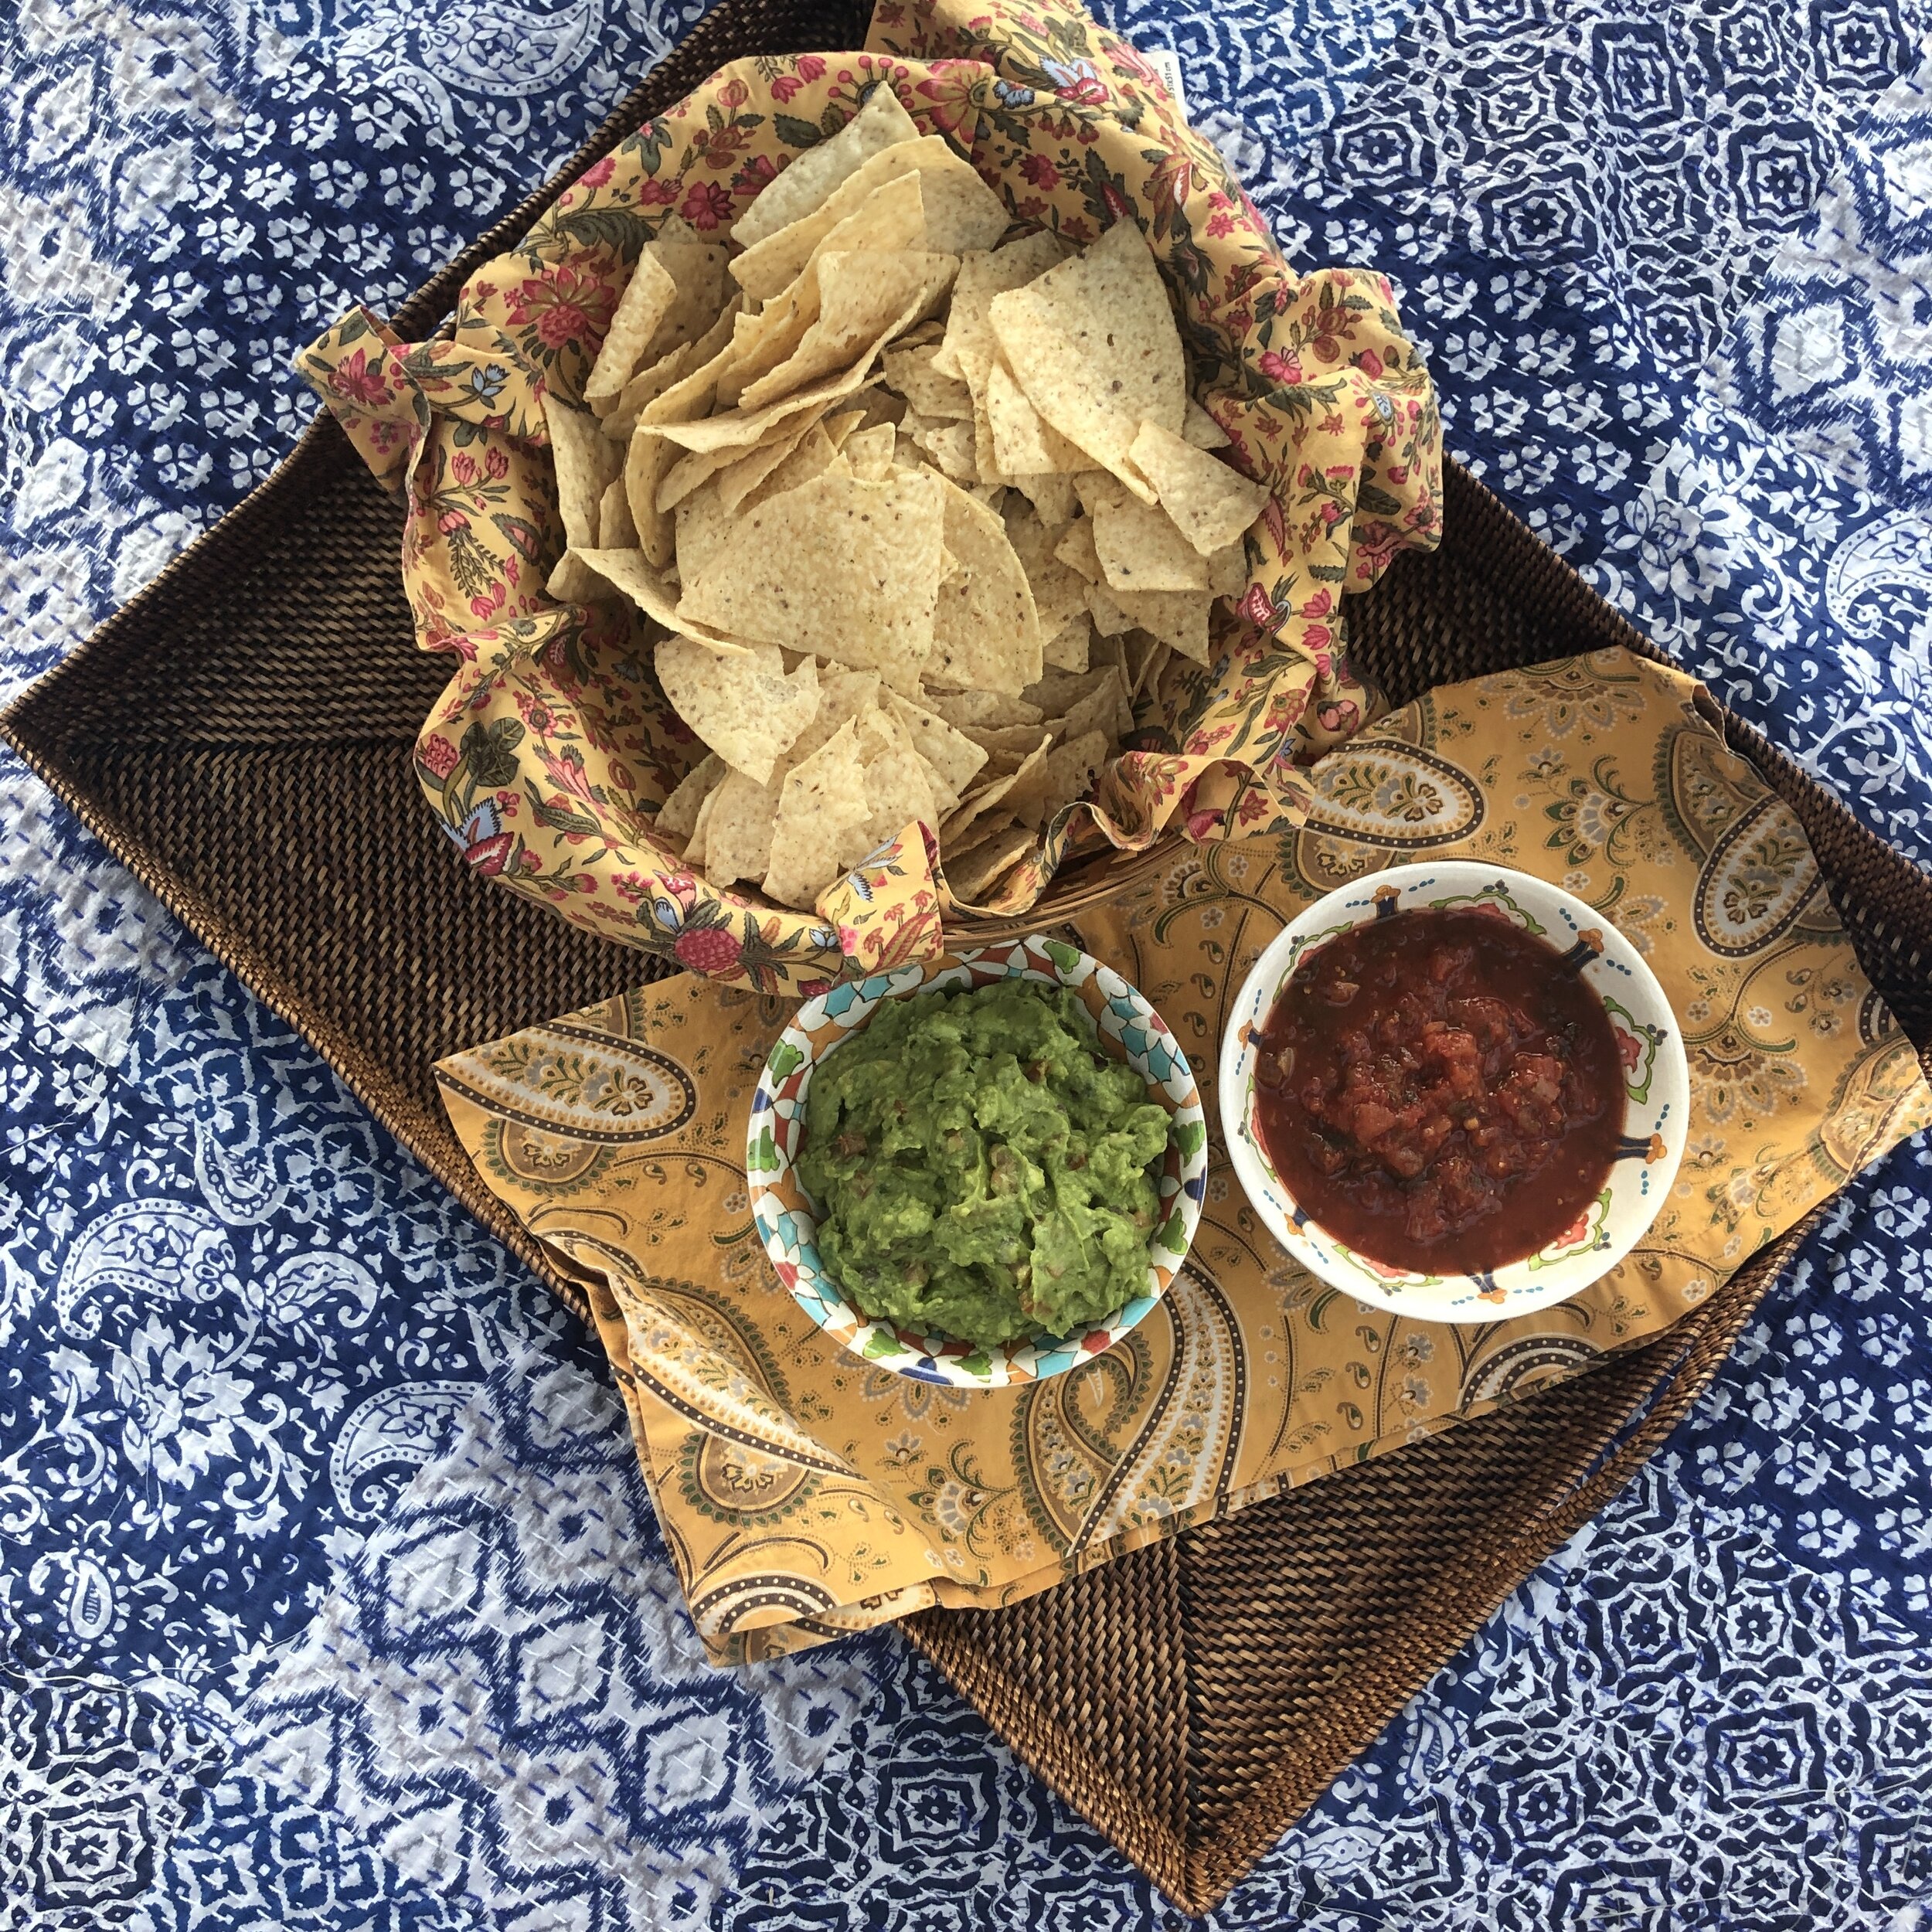 corn chips, salsa, and guacamole - one of my fave gluten free snacks